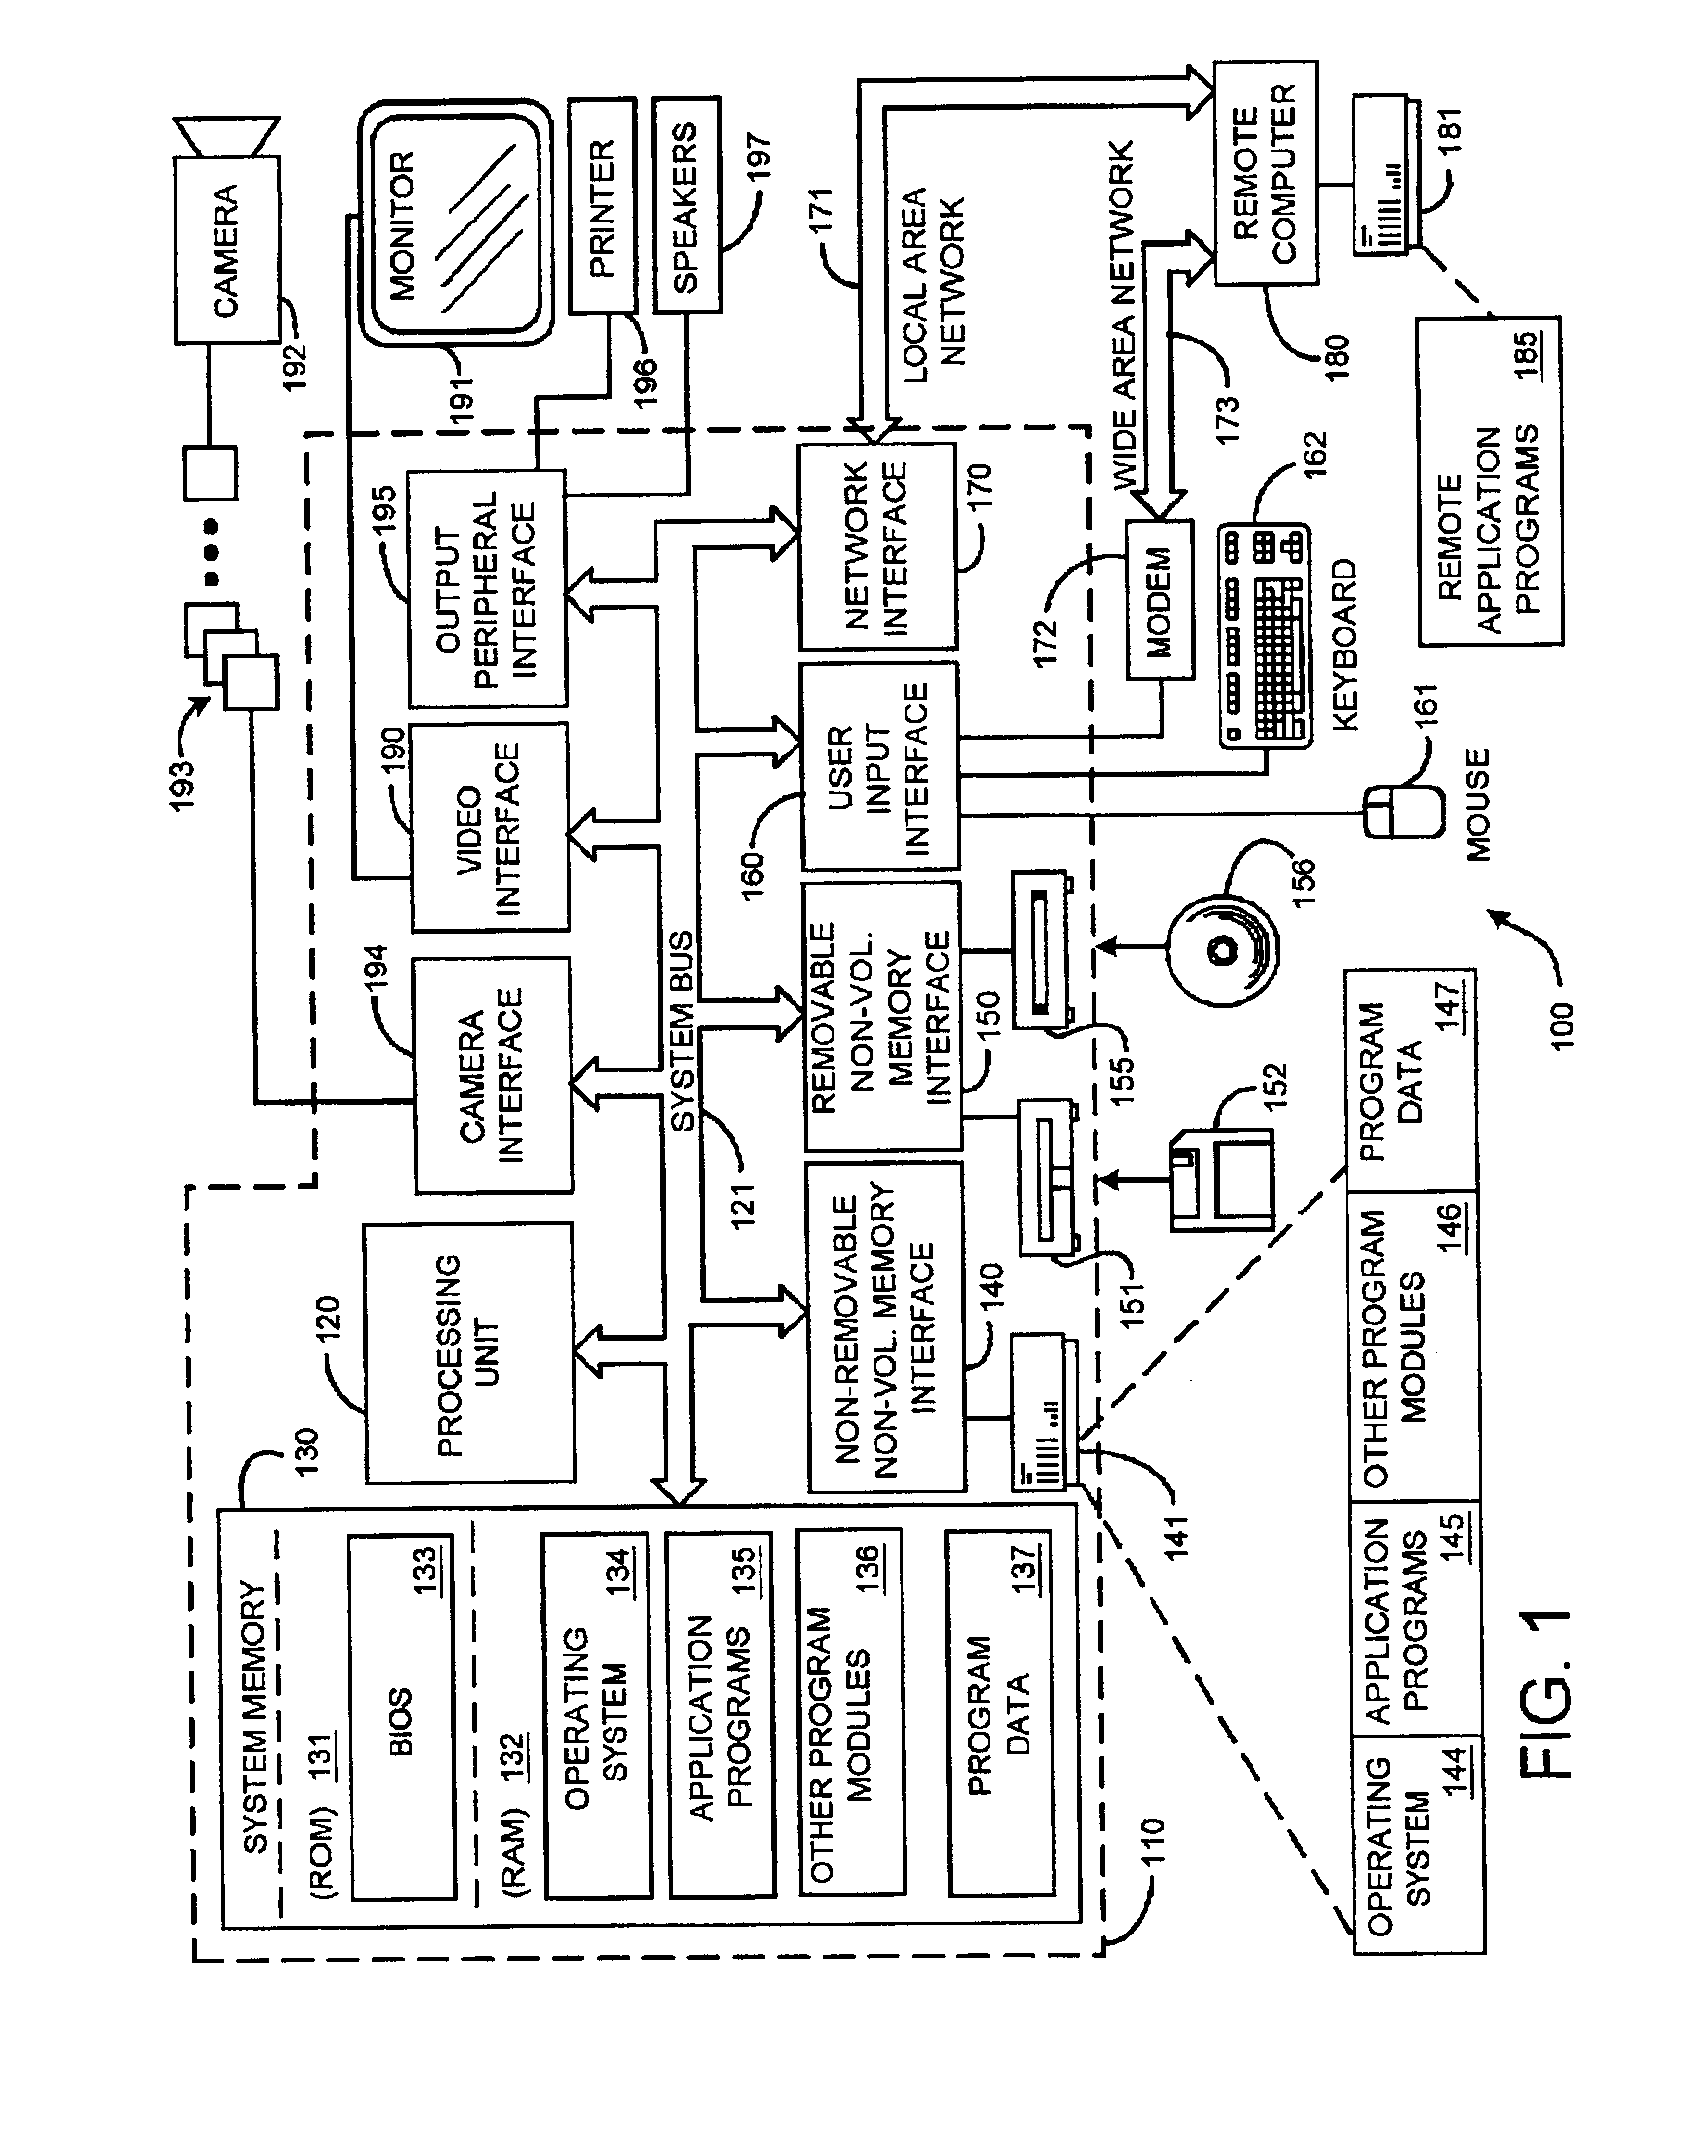 System and process for automatically determining optimal image compression methods for reducing file size